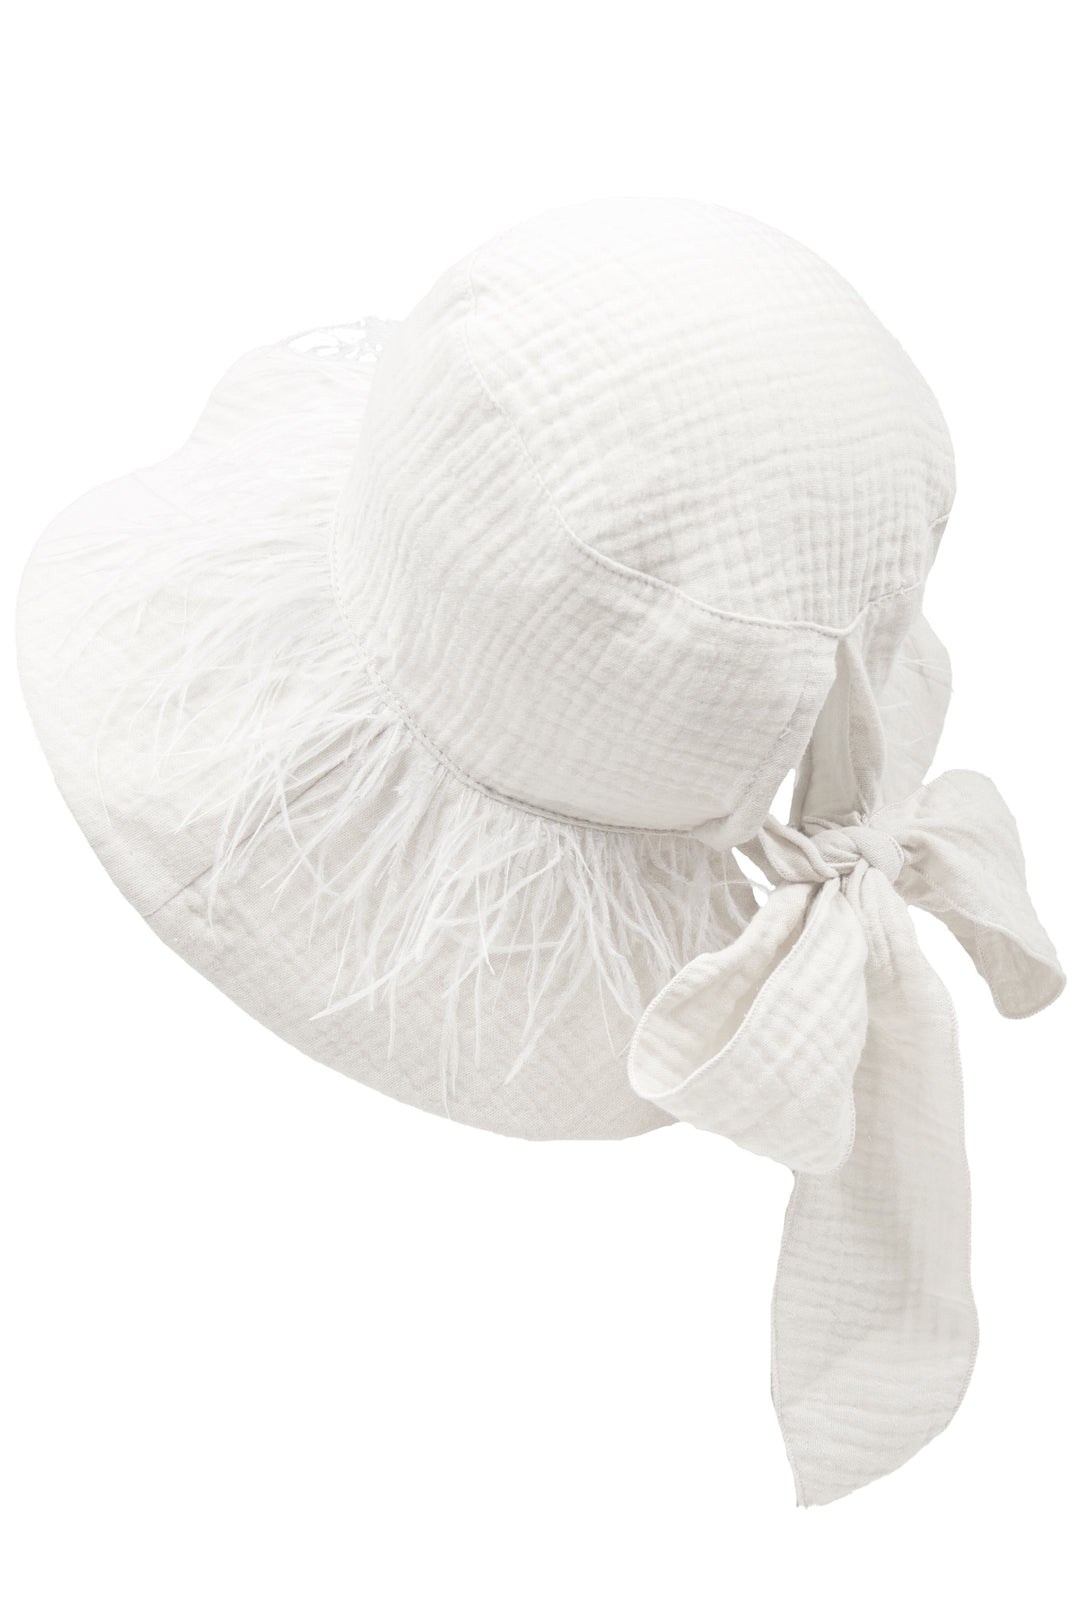 Jamiks "Akali" Ecru Cheesecloth Feather Trim Hat | iphoneandroidapplications